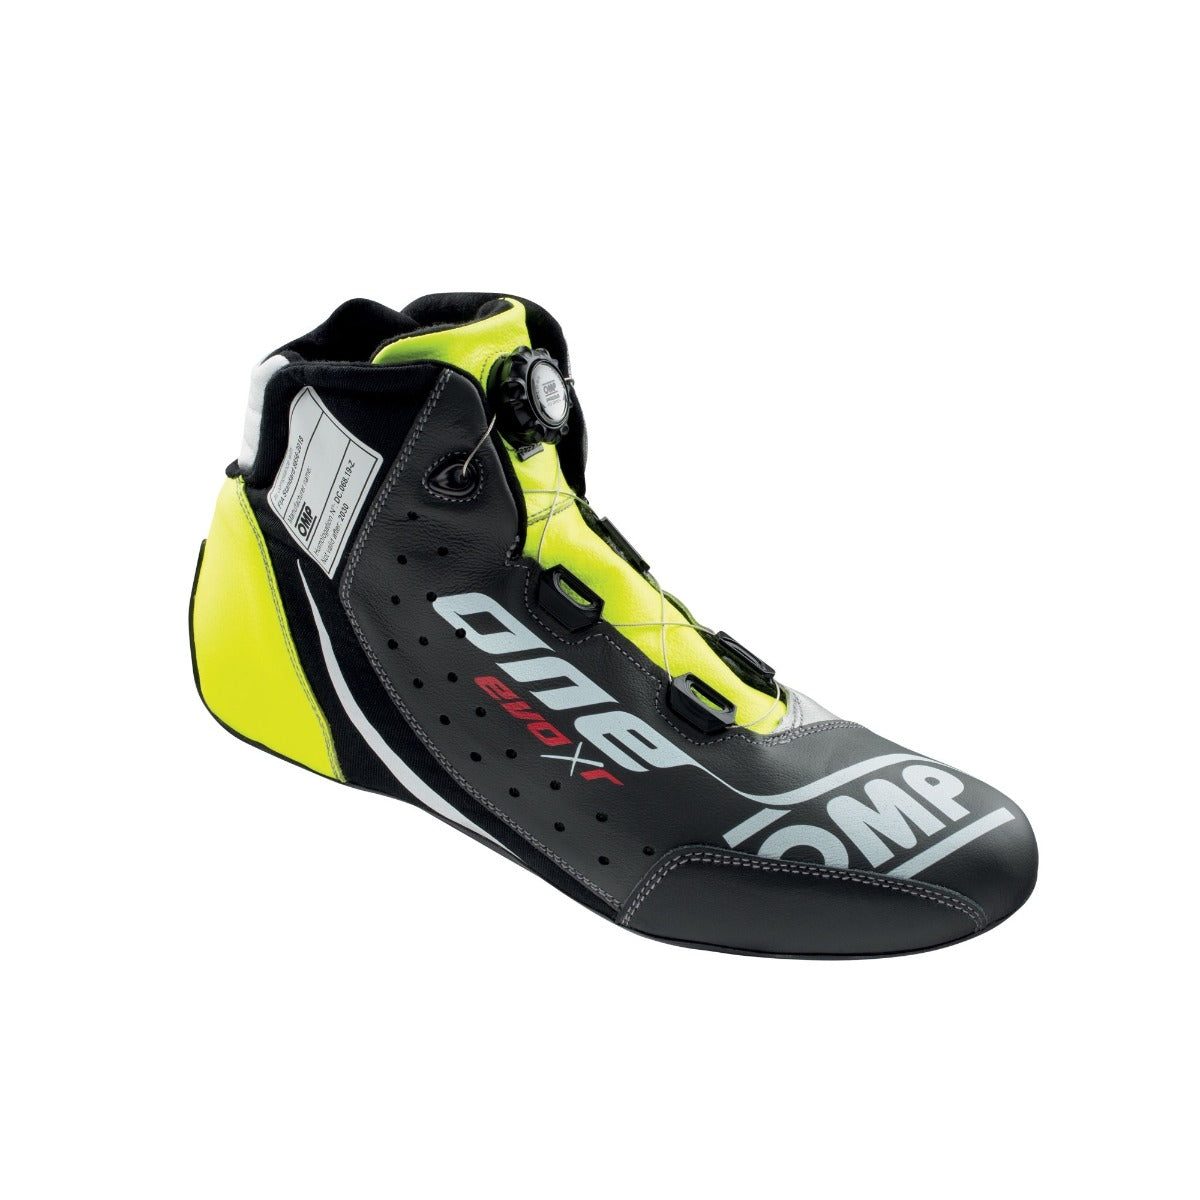 Image of OMP One Evo X R Nomex Race Shoe in black and yellow